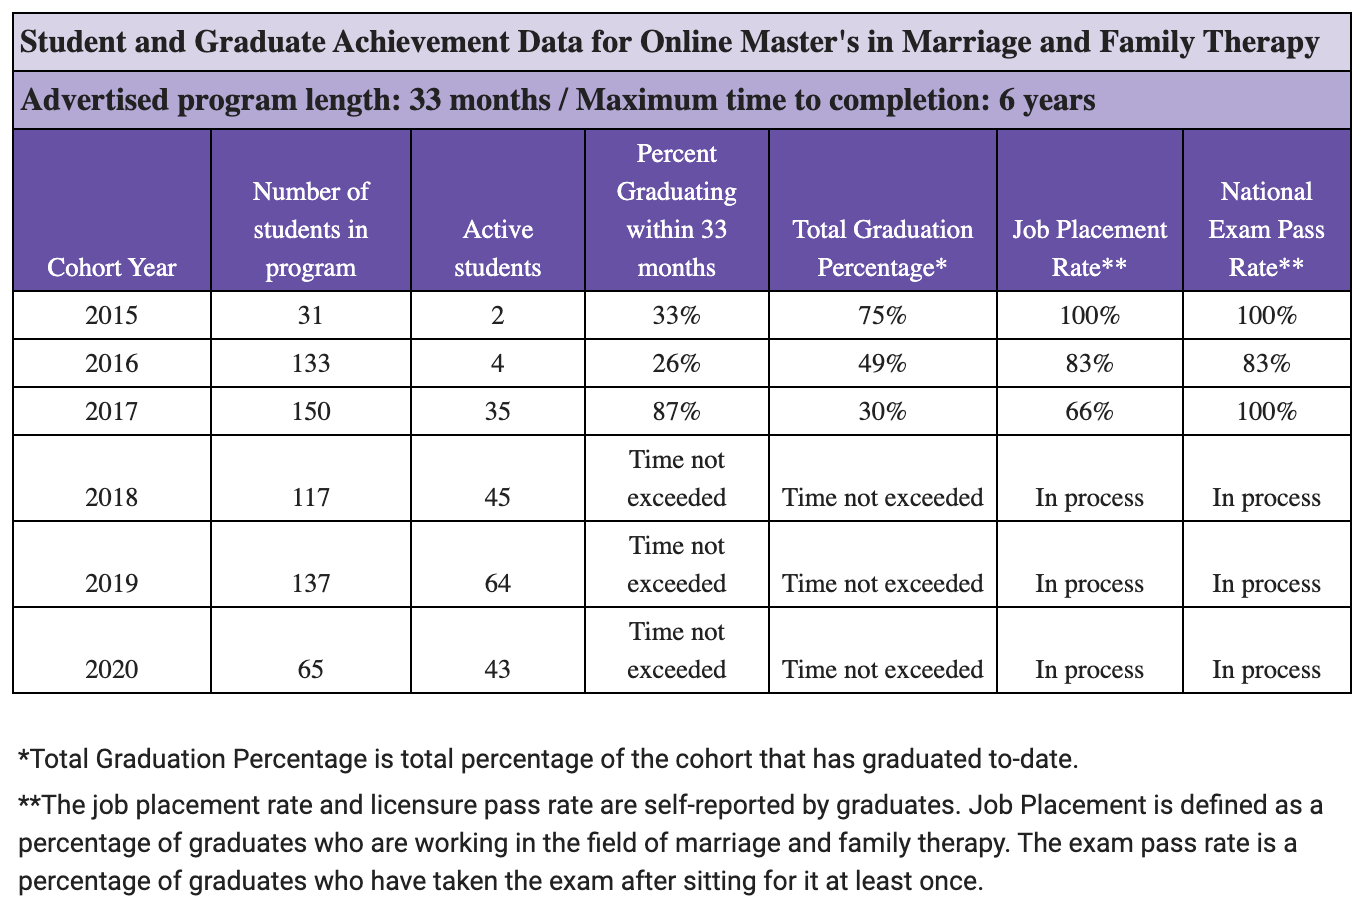 MMFT Student Achievement Data. Reach out to ACU Online for clarification